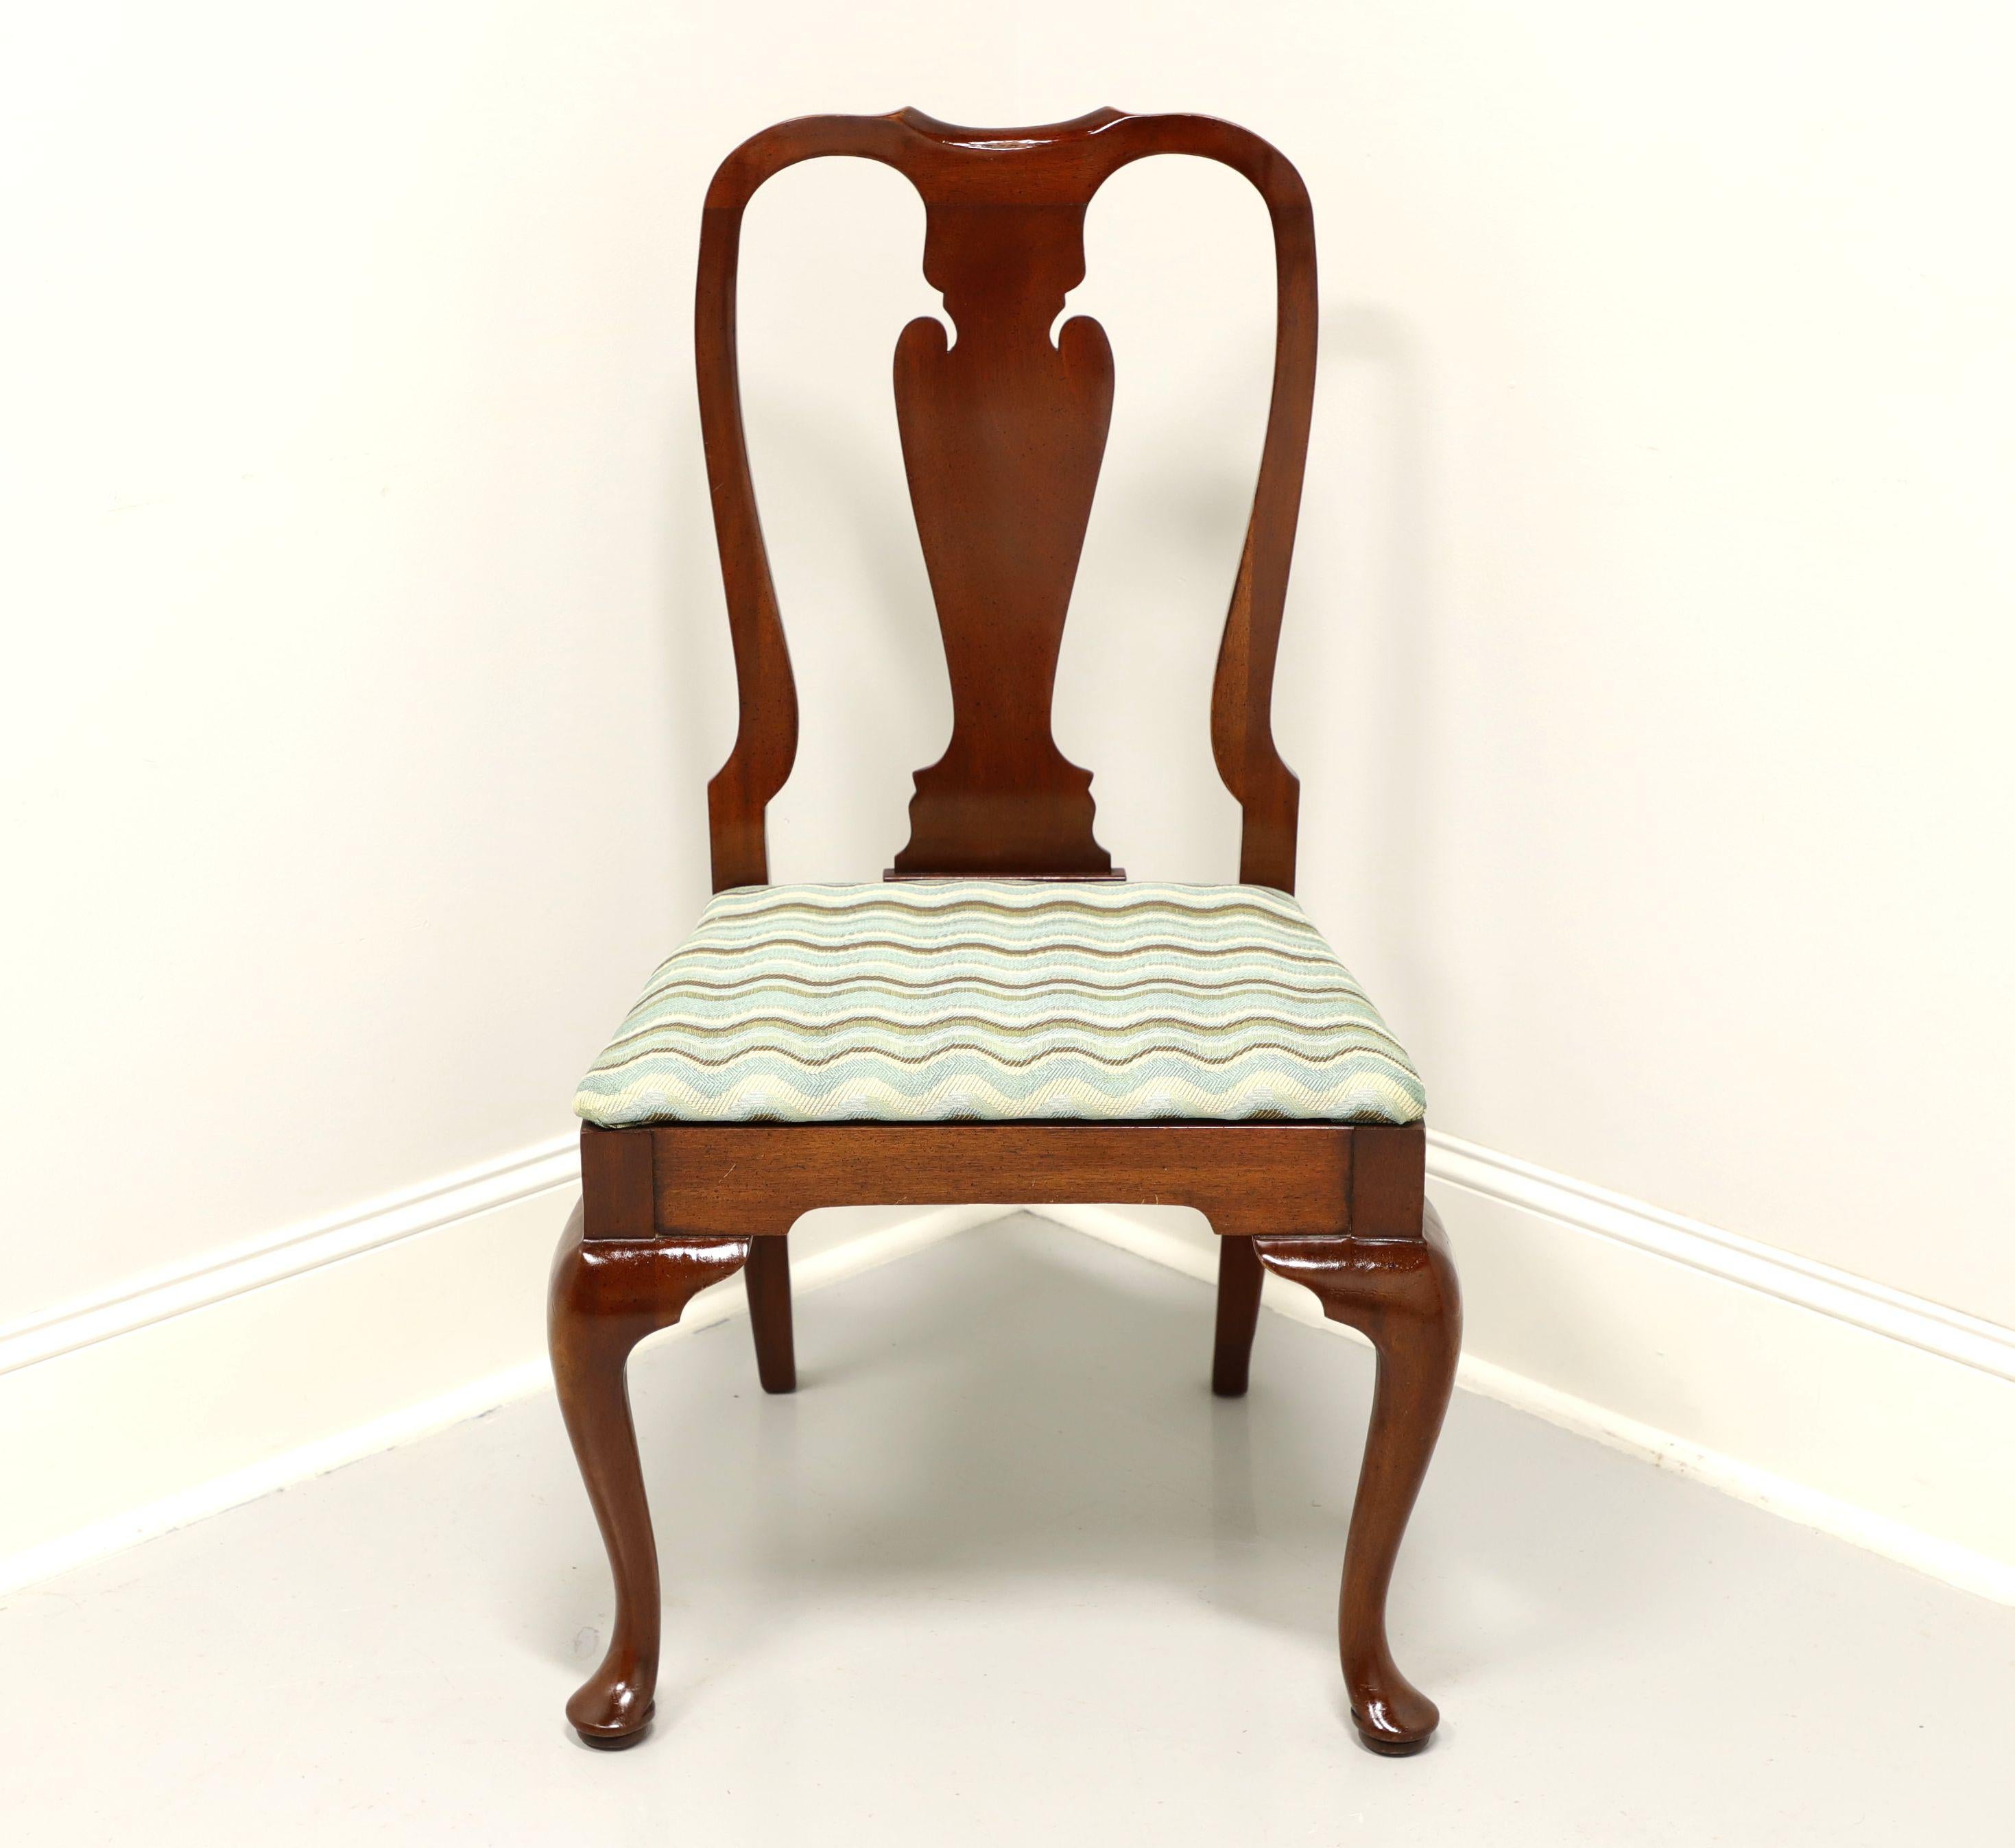 A Queen Anne style dining side chair by top quality furniture maker, Hickory Chair Company. Solid mahogany with their Amber Mahogany finish, carved back rest, blue/brown/cream color wavy pattern fabric upholstered seat, cabriole front legs and pad